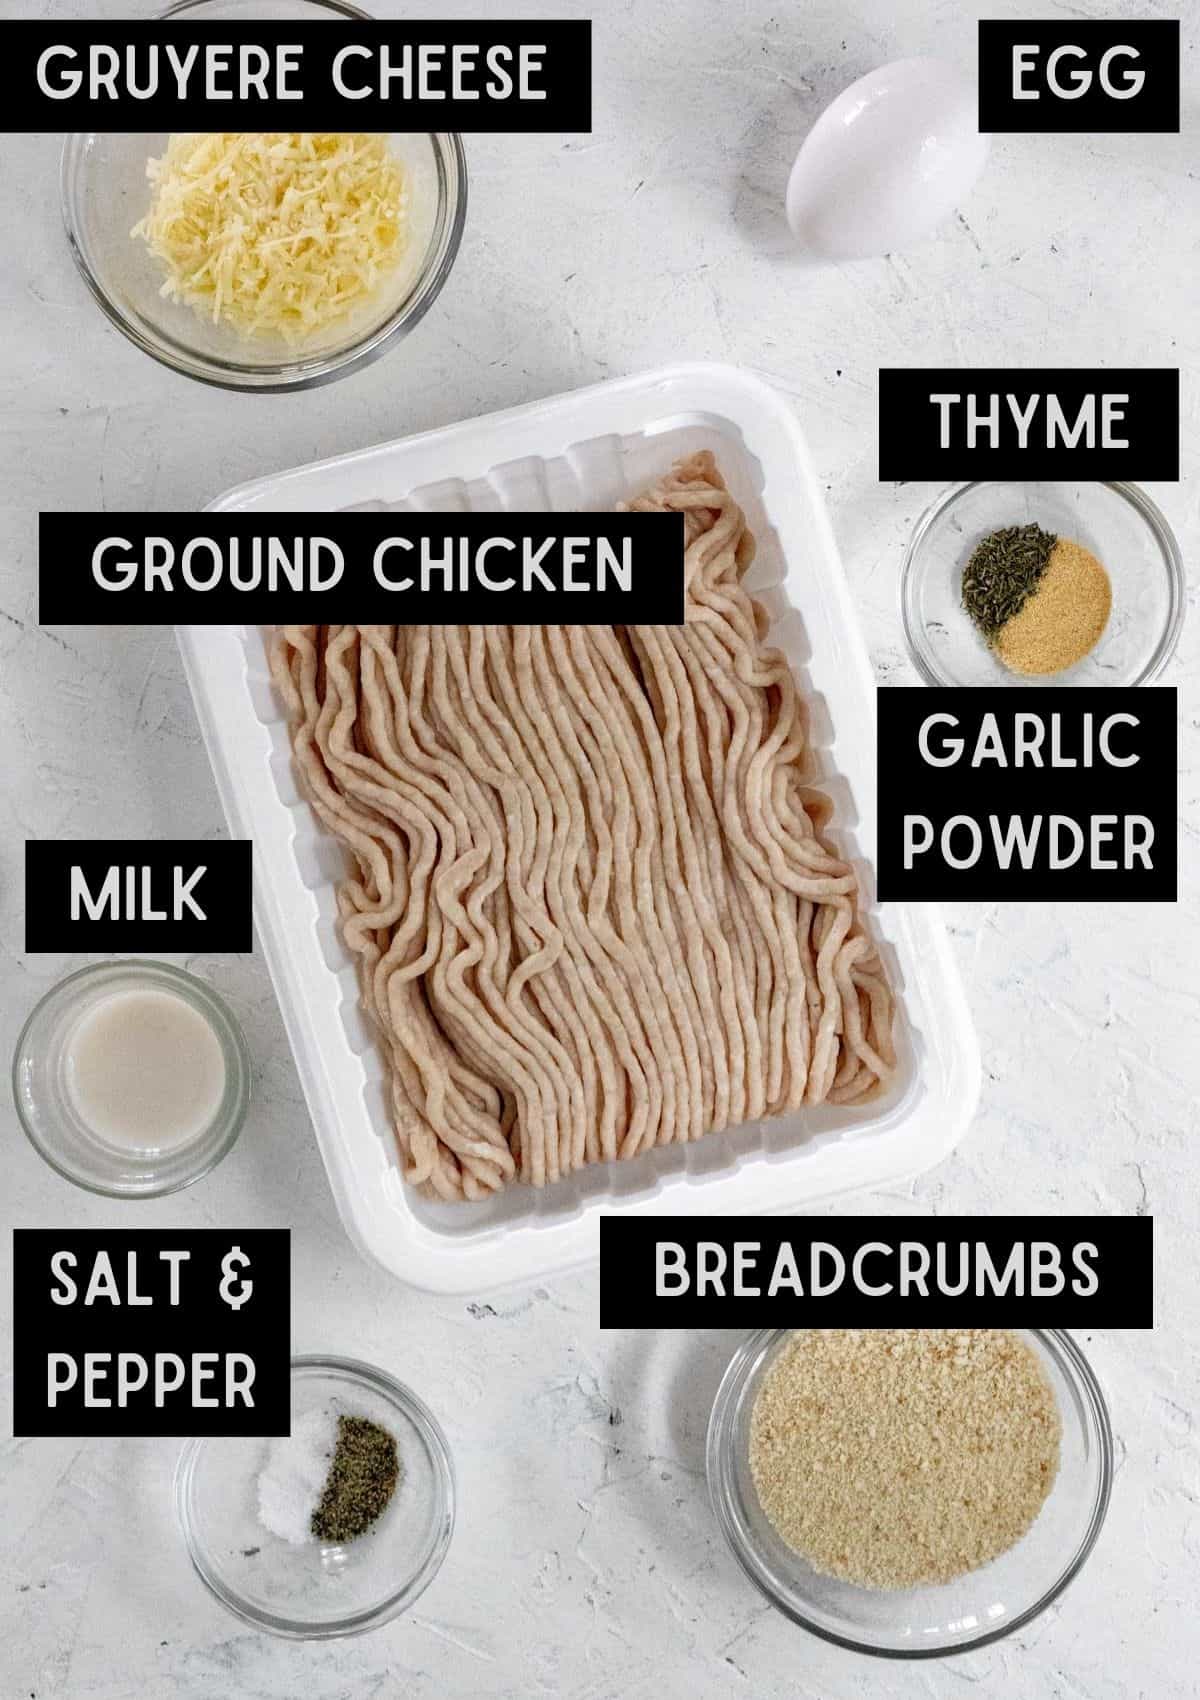 Labelled ingredients for the ground chicken meatballs (see recipe for details).